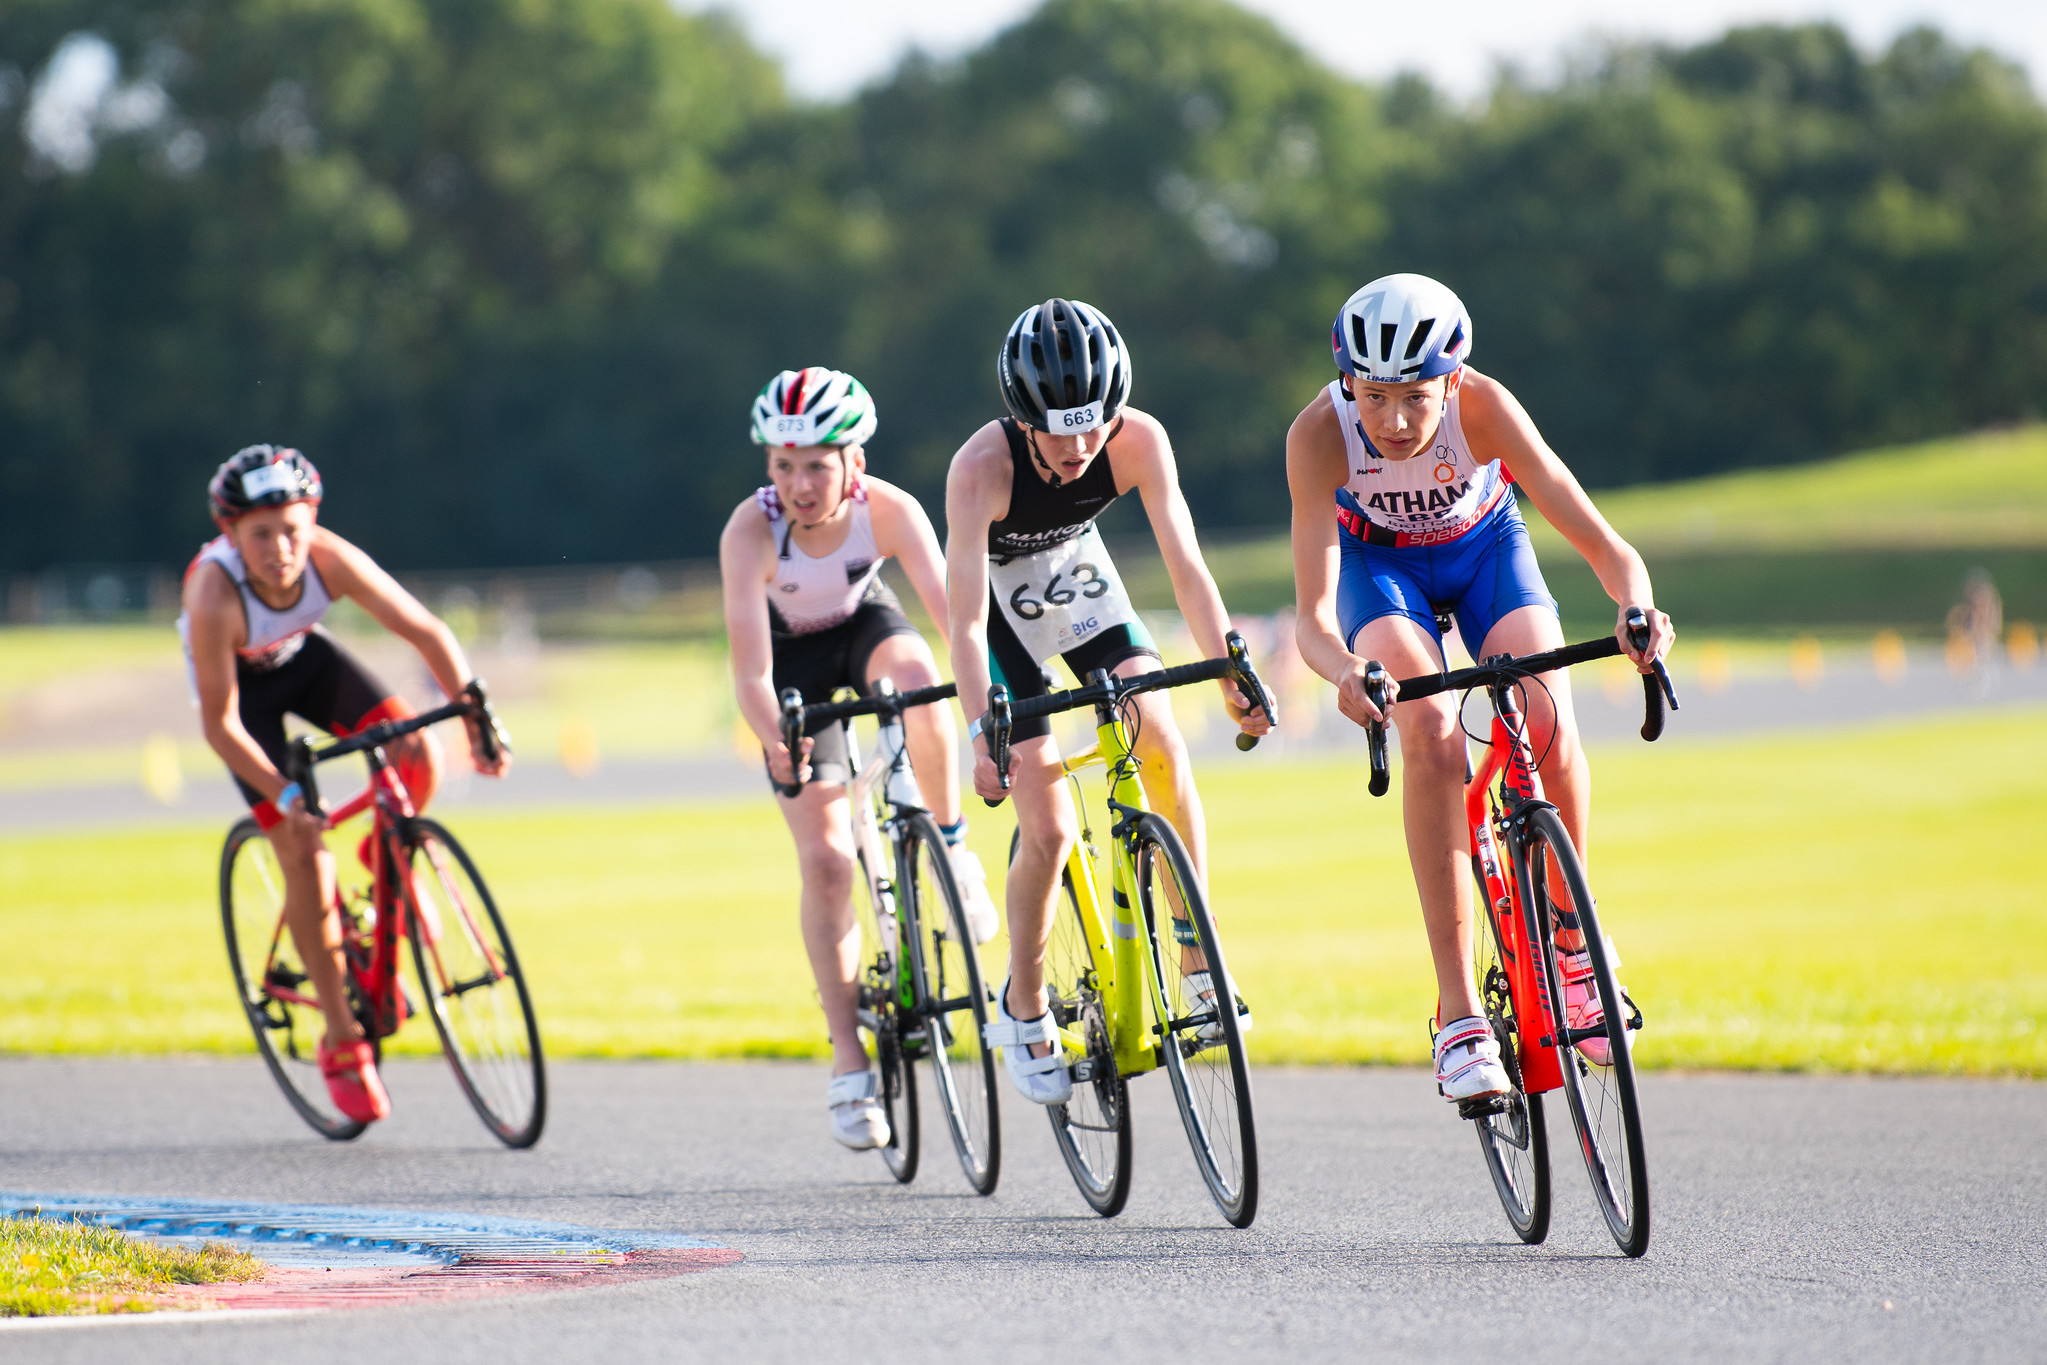 Entries are now open for the Pre-Performance Assessment Bike Intelligent Race Days